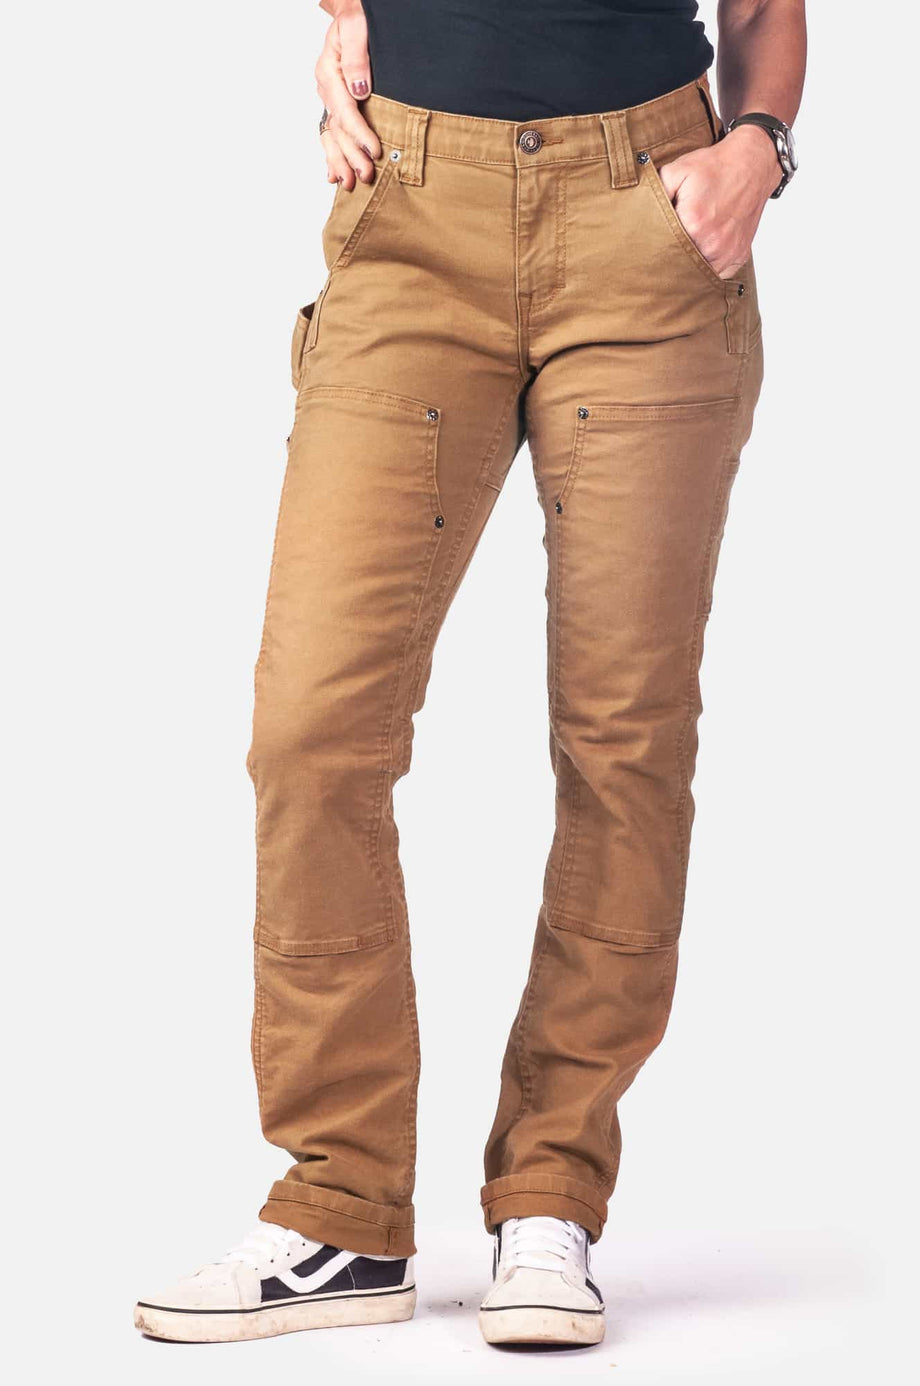 Dovetail Workwear Women's Saddle Brown Canvas Work Pants, 46% OFF